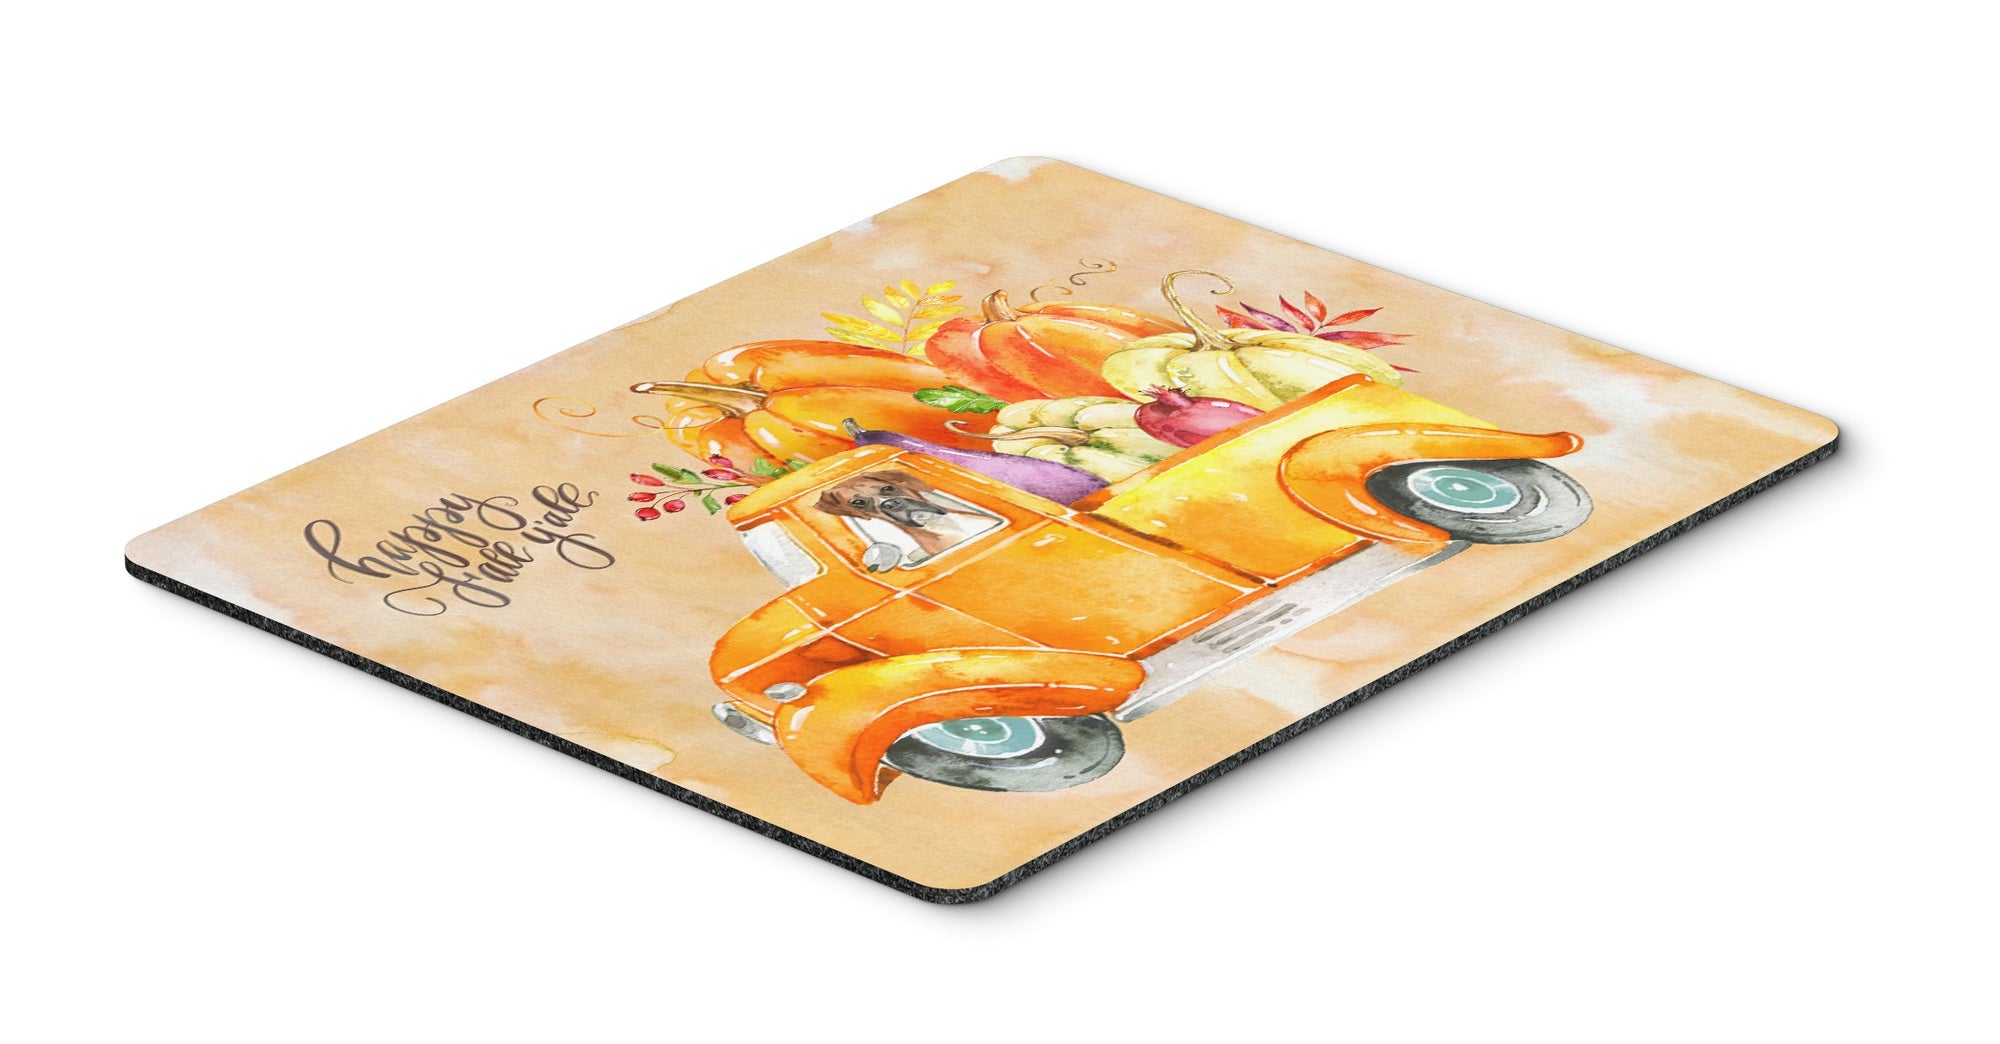 Fall Harvest Boxer Mouse Pad, Hot Pad or Trivet CK2612MP by Caroline's Treasures